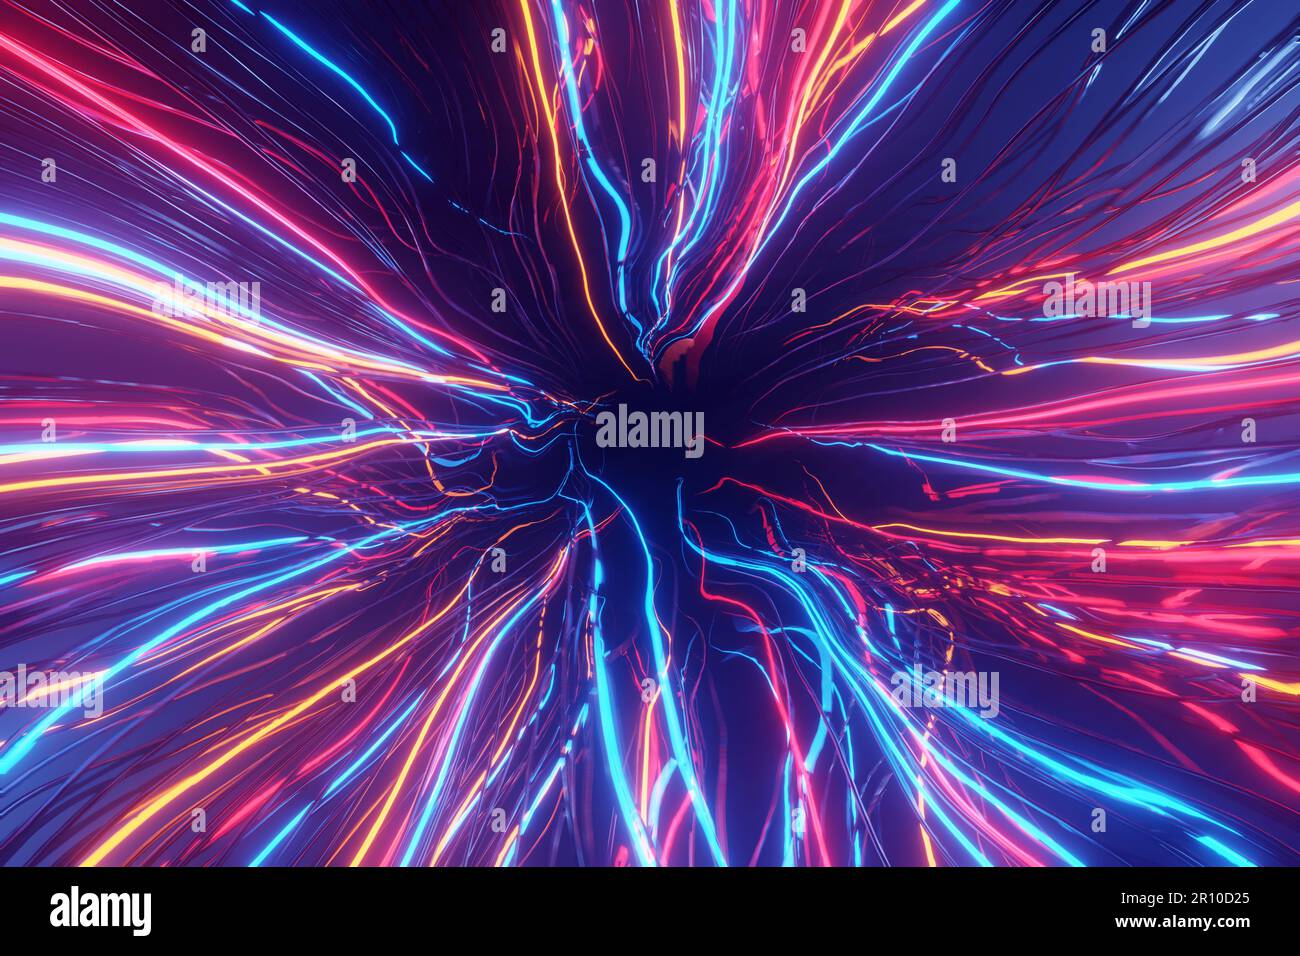 Abstract colorful tentacle-like light streaks reaching out to the centre. Design element for web design backgrounds and slide show presentations Stock Photo